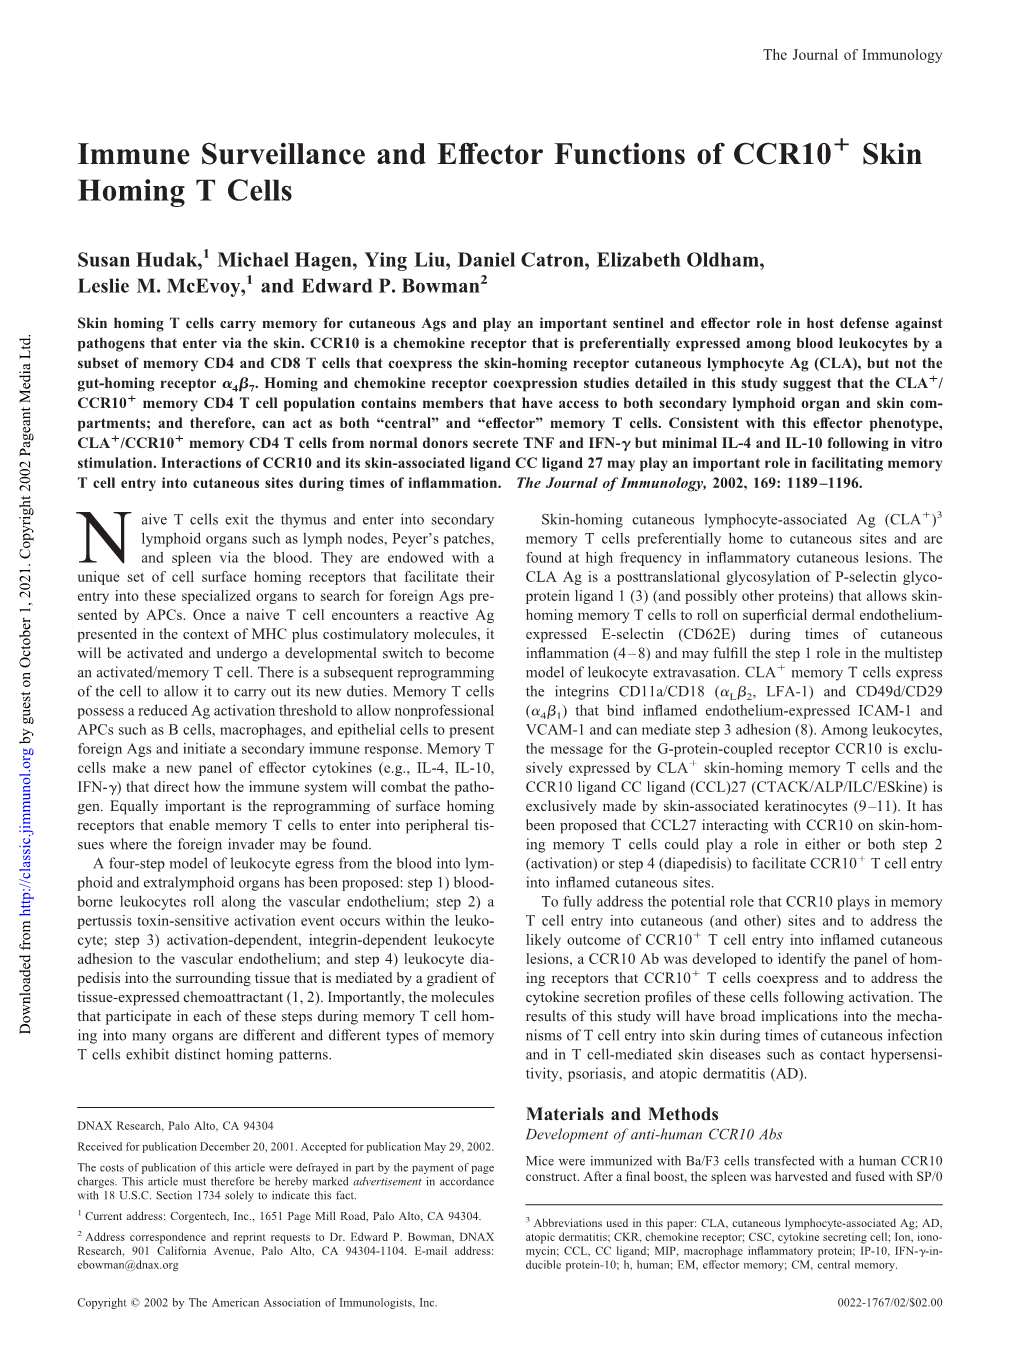 Skin Homing T Cells + of CCR10 Immune Surveillance and Effector